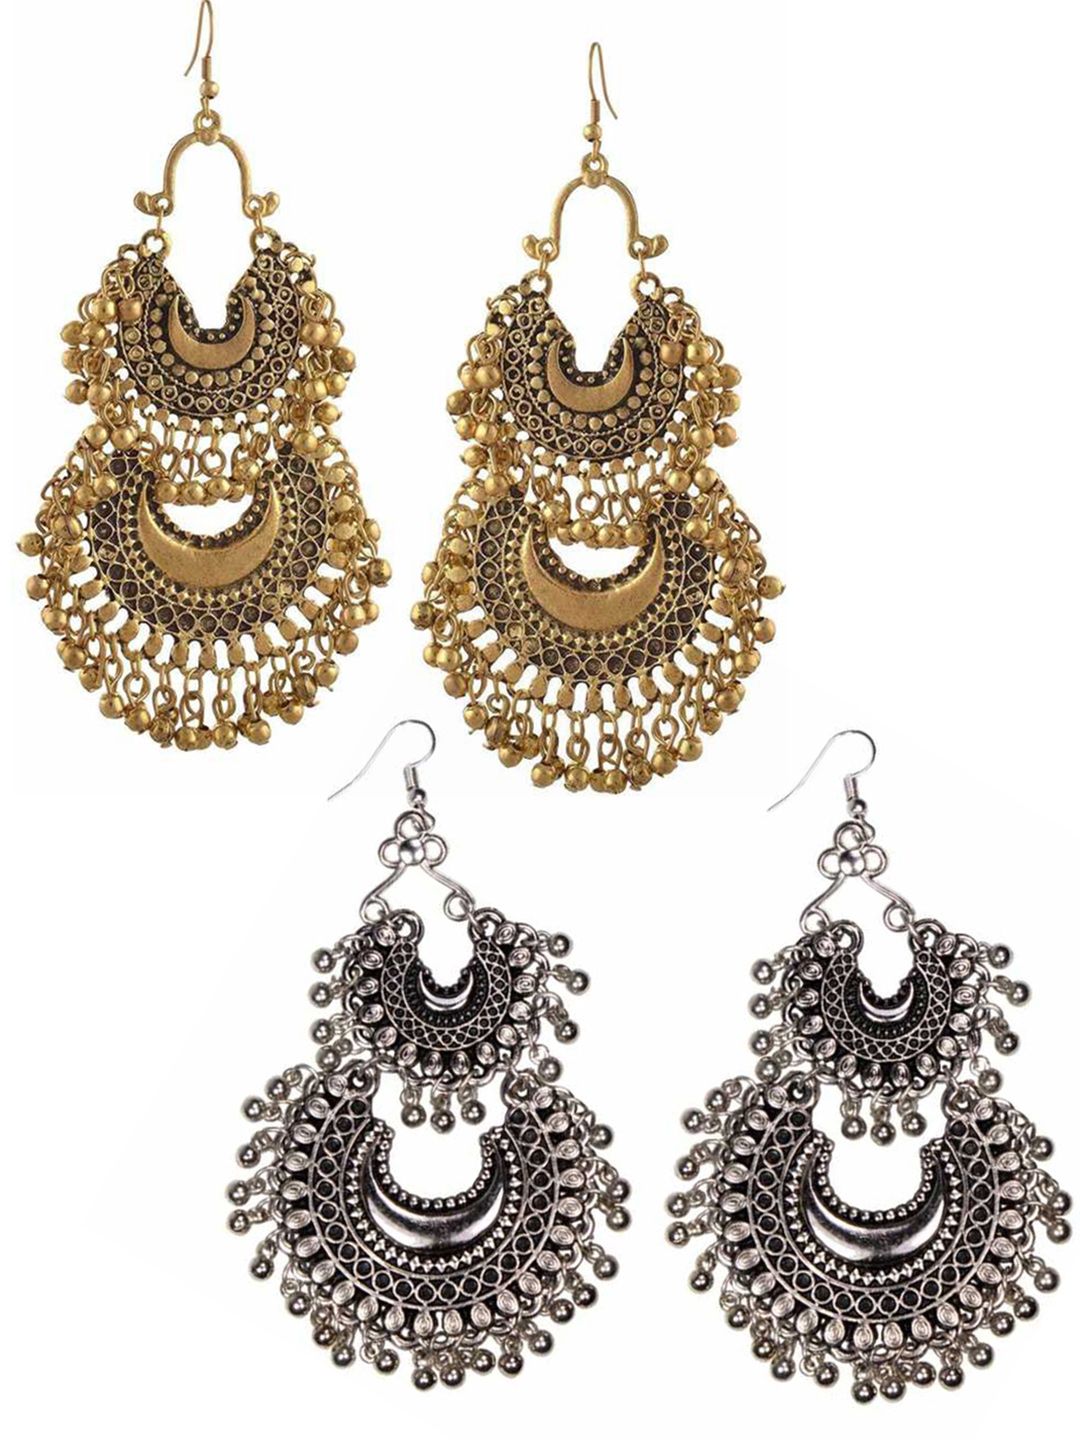 Vembley Set Of 2 Silver-Toned & Gold-Toned Crescent Shaped Chandbalis Price in India